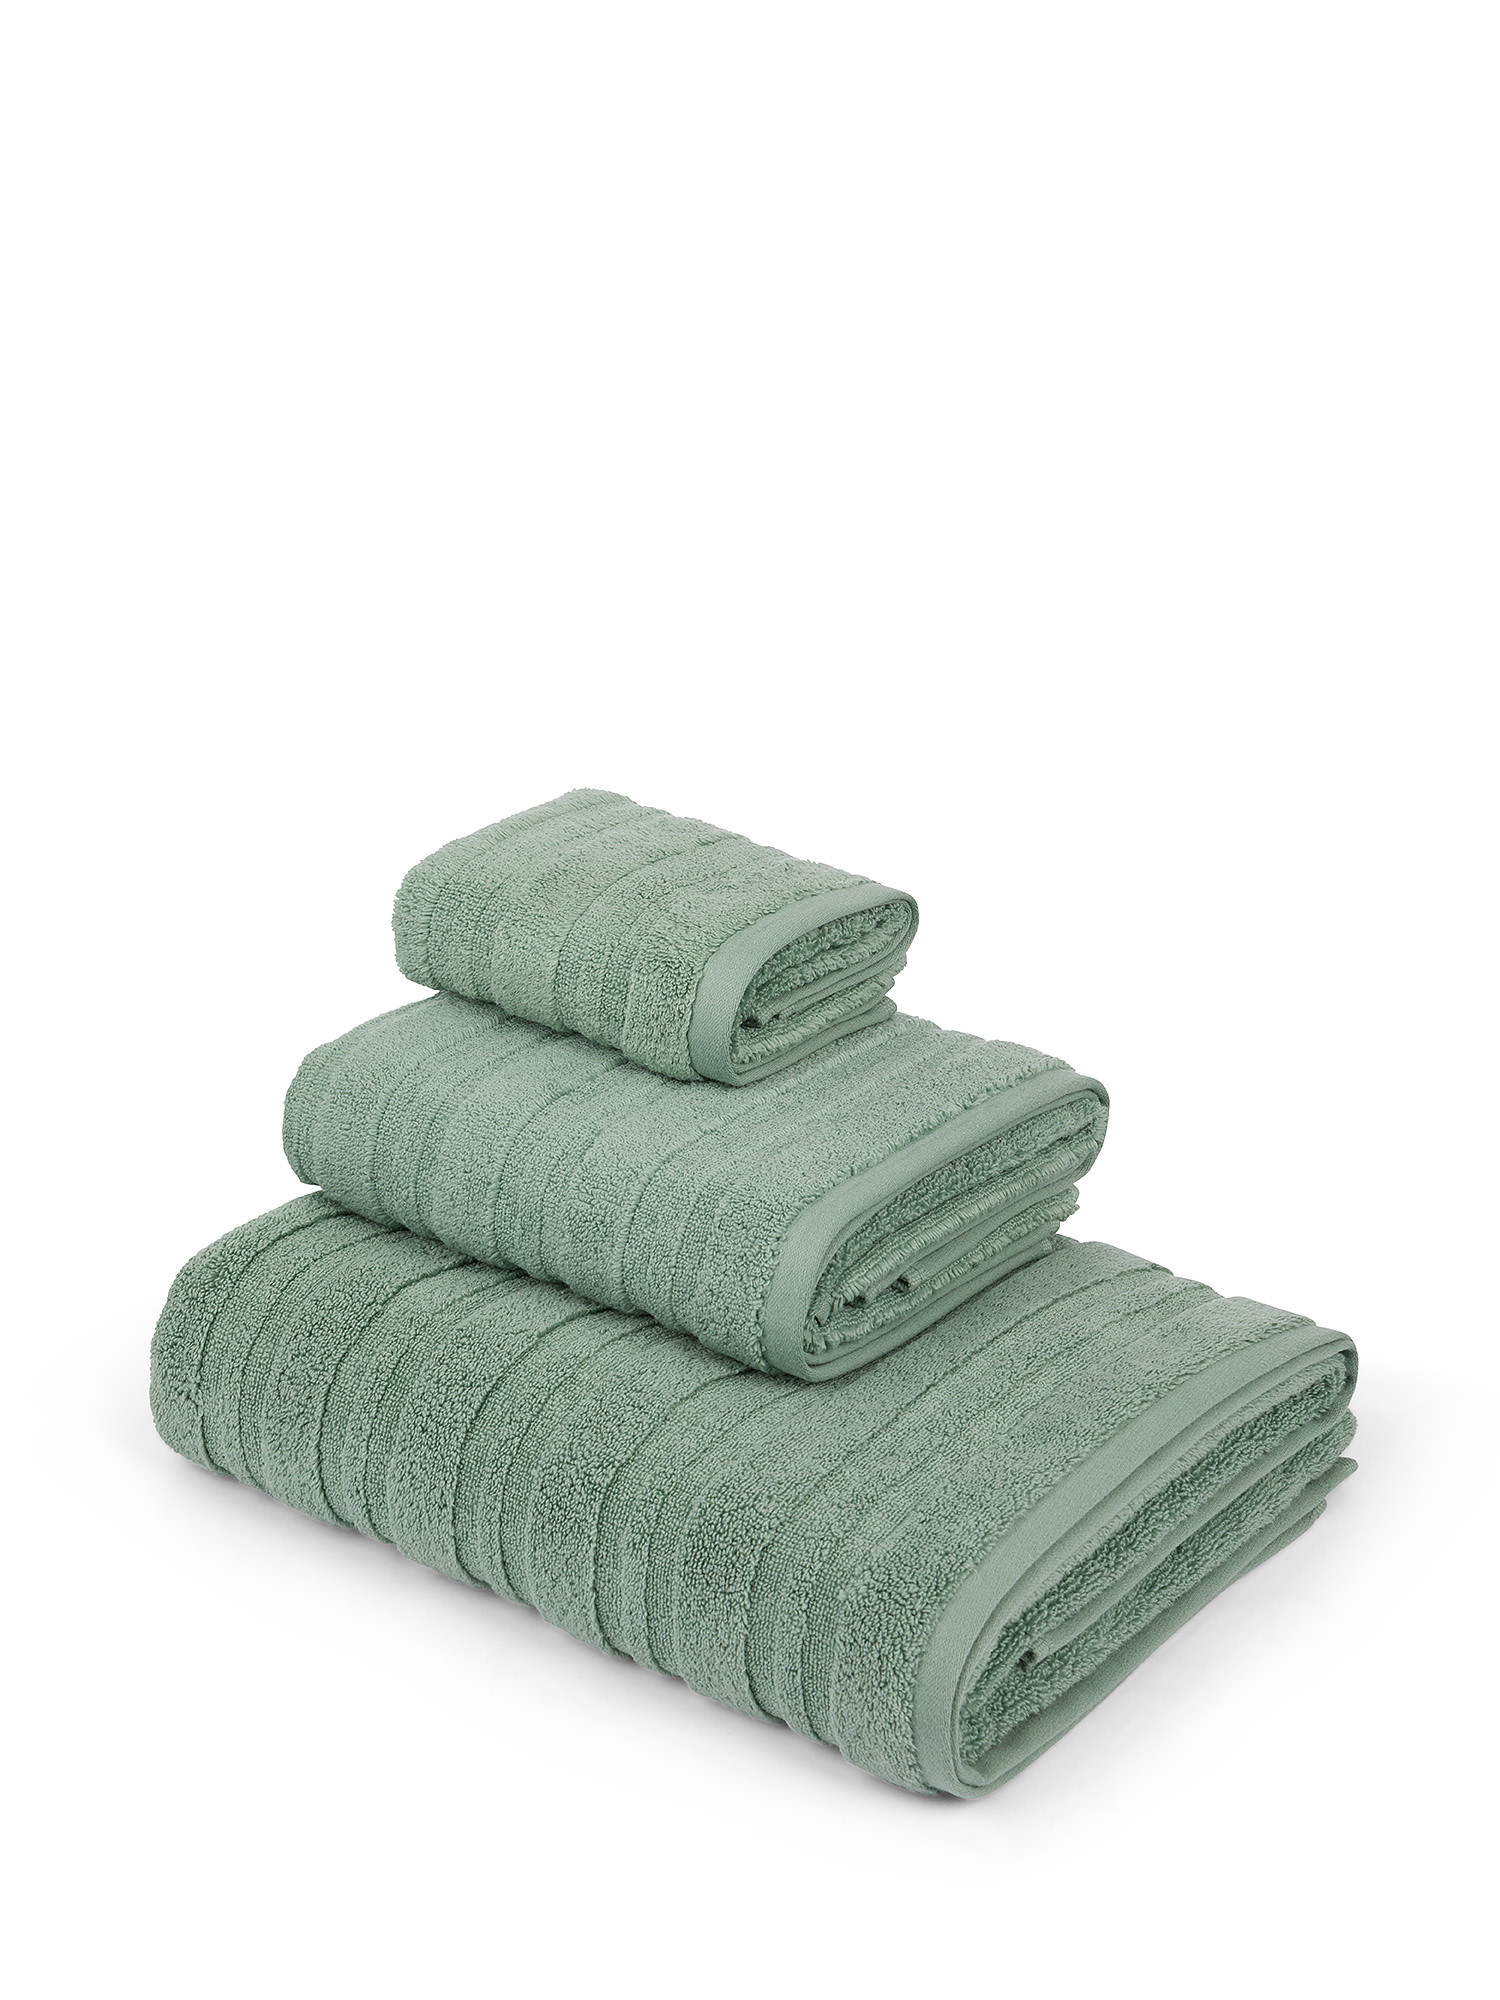 Zefiro Gold solid color 100% cotton towel, Light Green, large image number 0